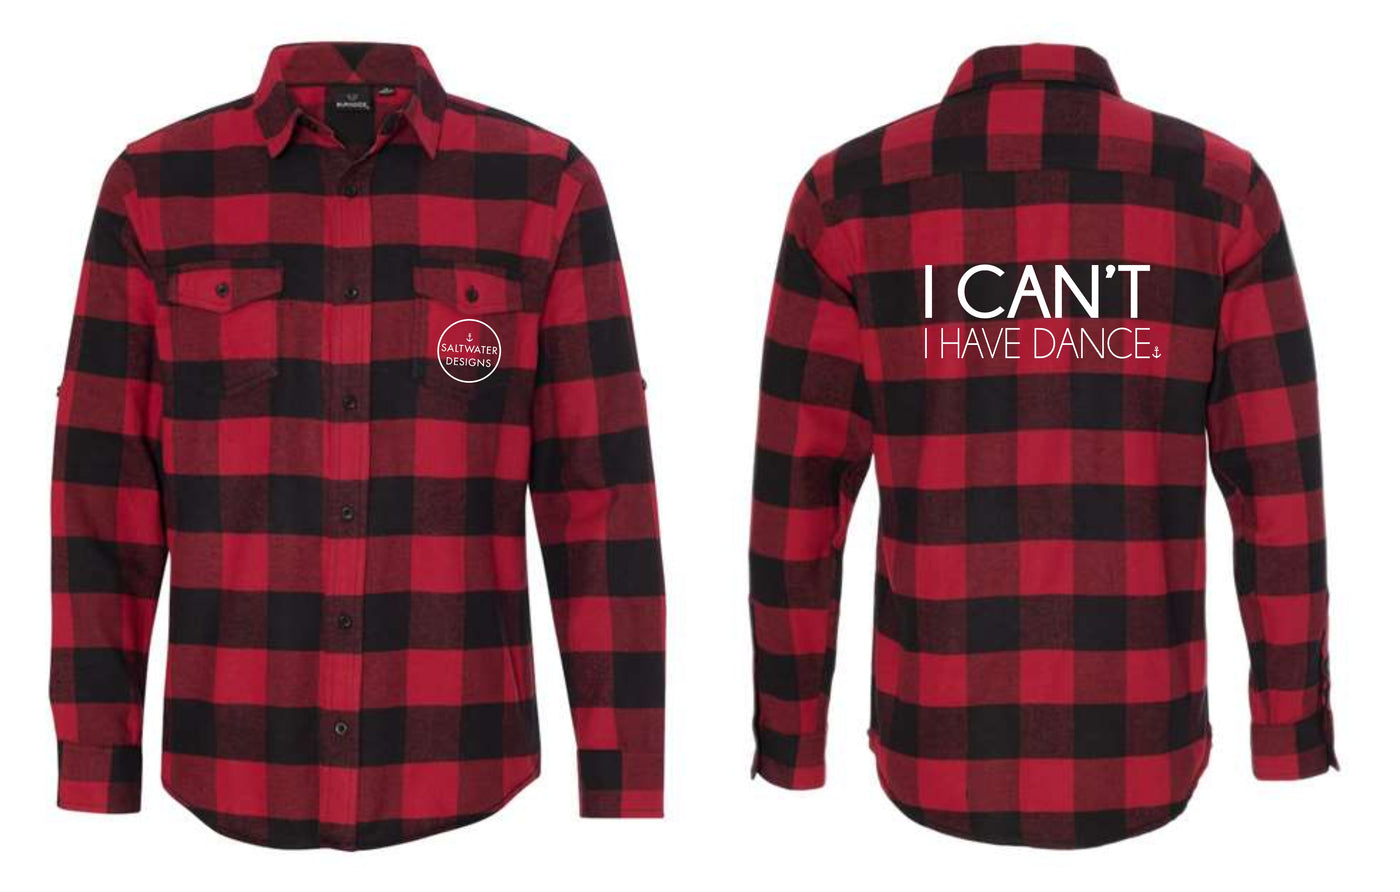 "I Can't. I Have Dance." Unisex Plaid Flannel Shirt